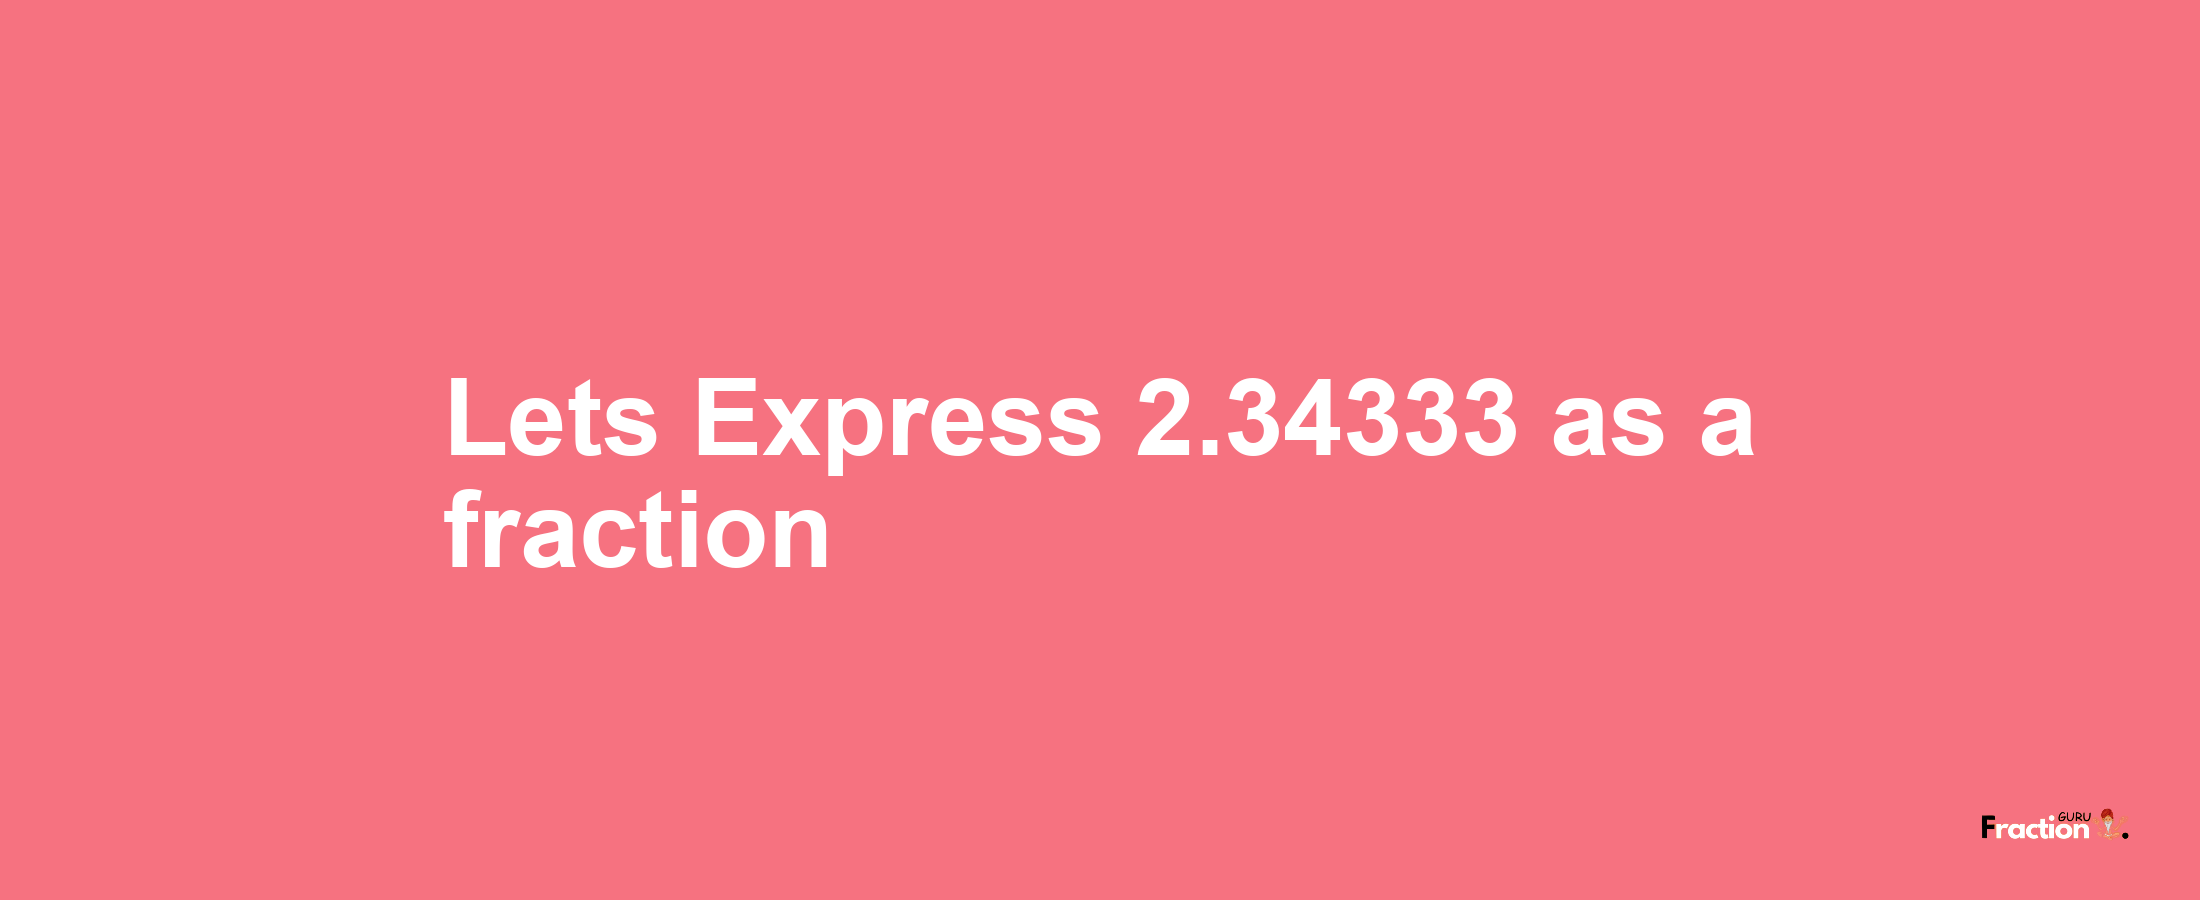 Lets Express 2.34333 as afraction